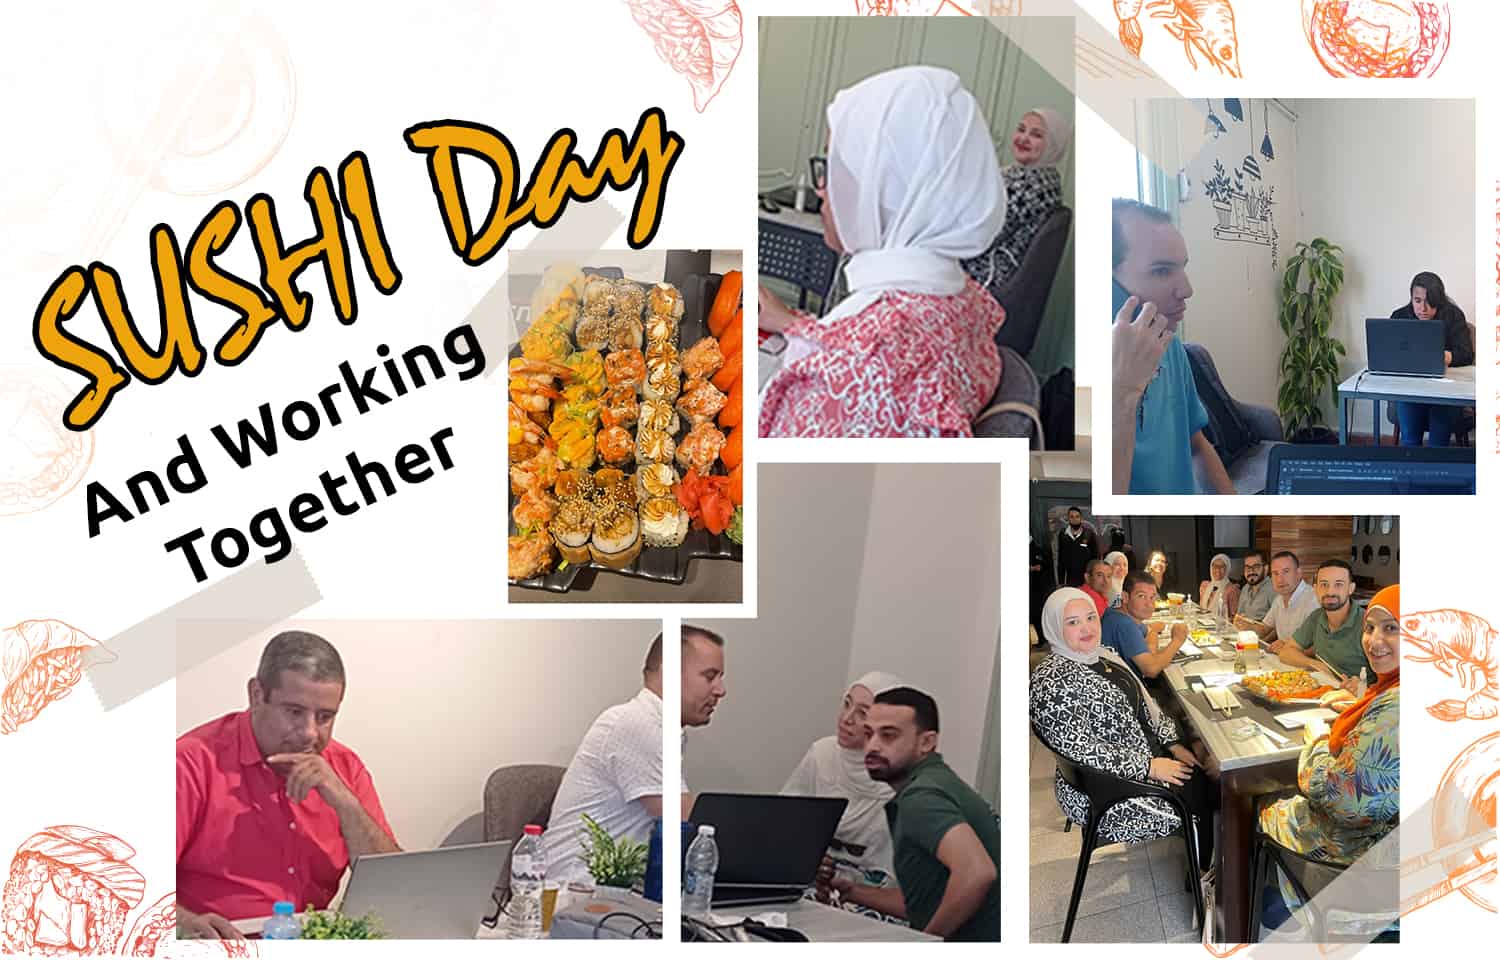 sushi day and working together